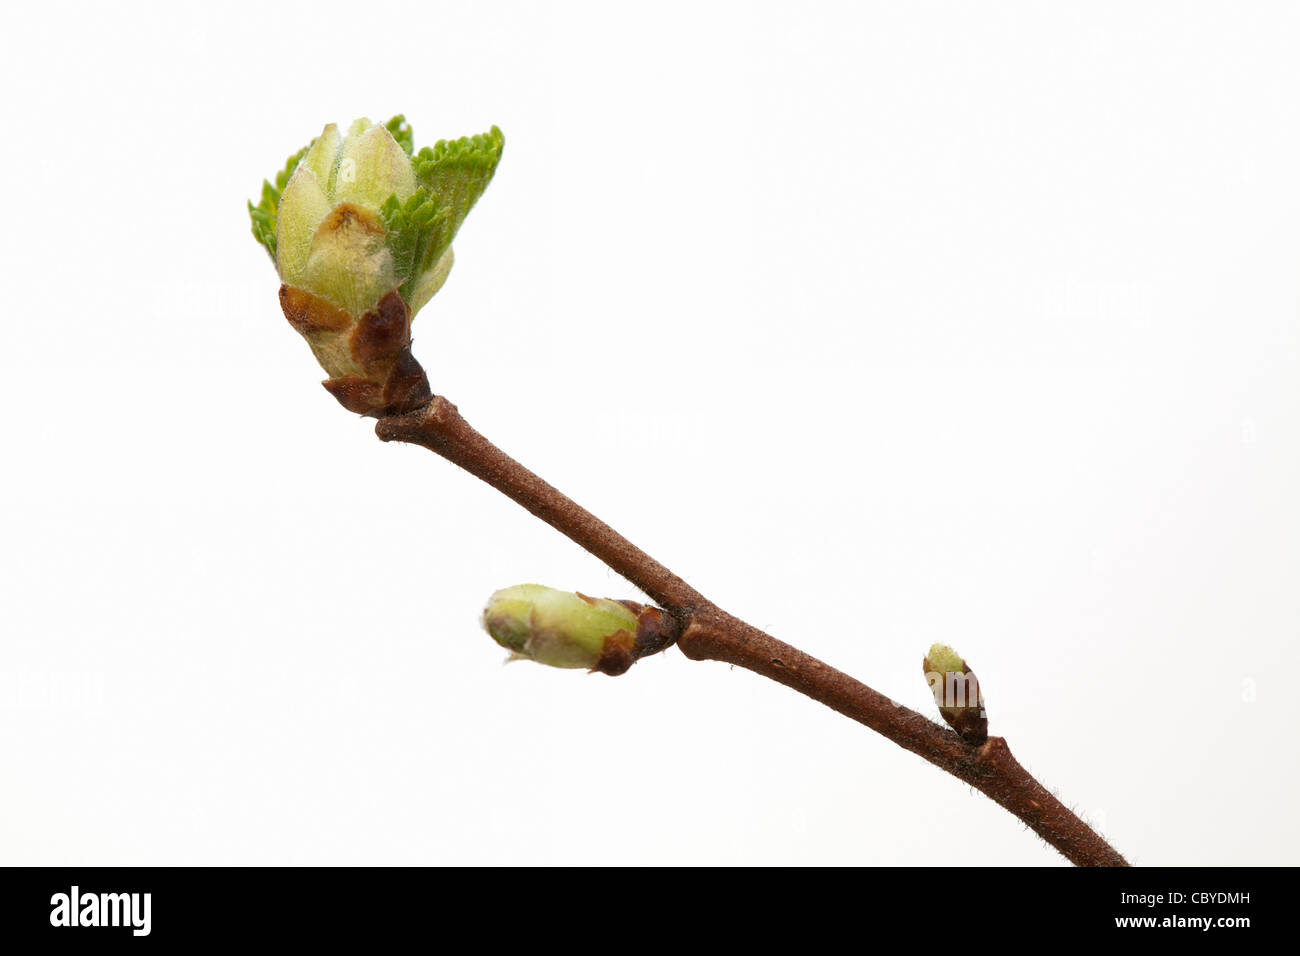 English Elm leaf emerging from bud in spring (Ulmus procera) on white background Sussex, UK Stock Photo